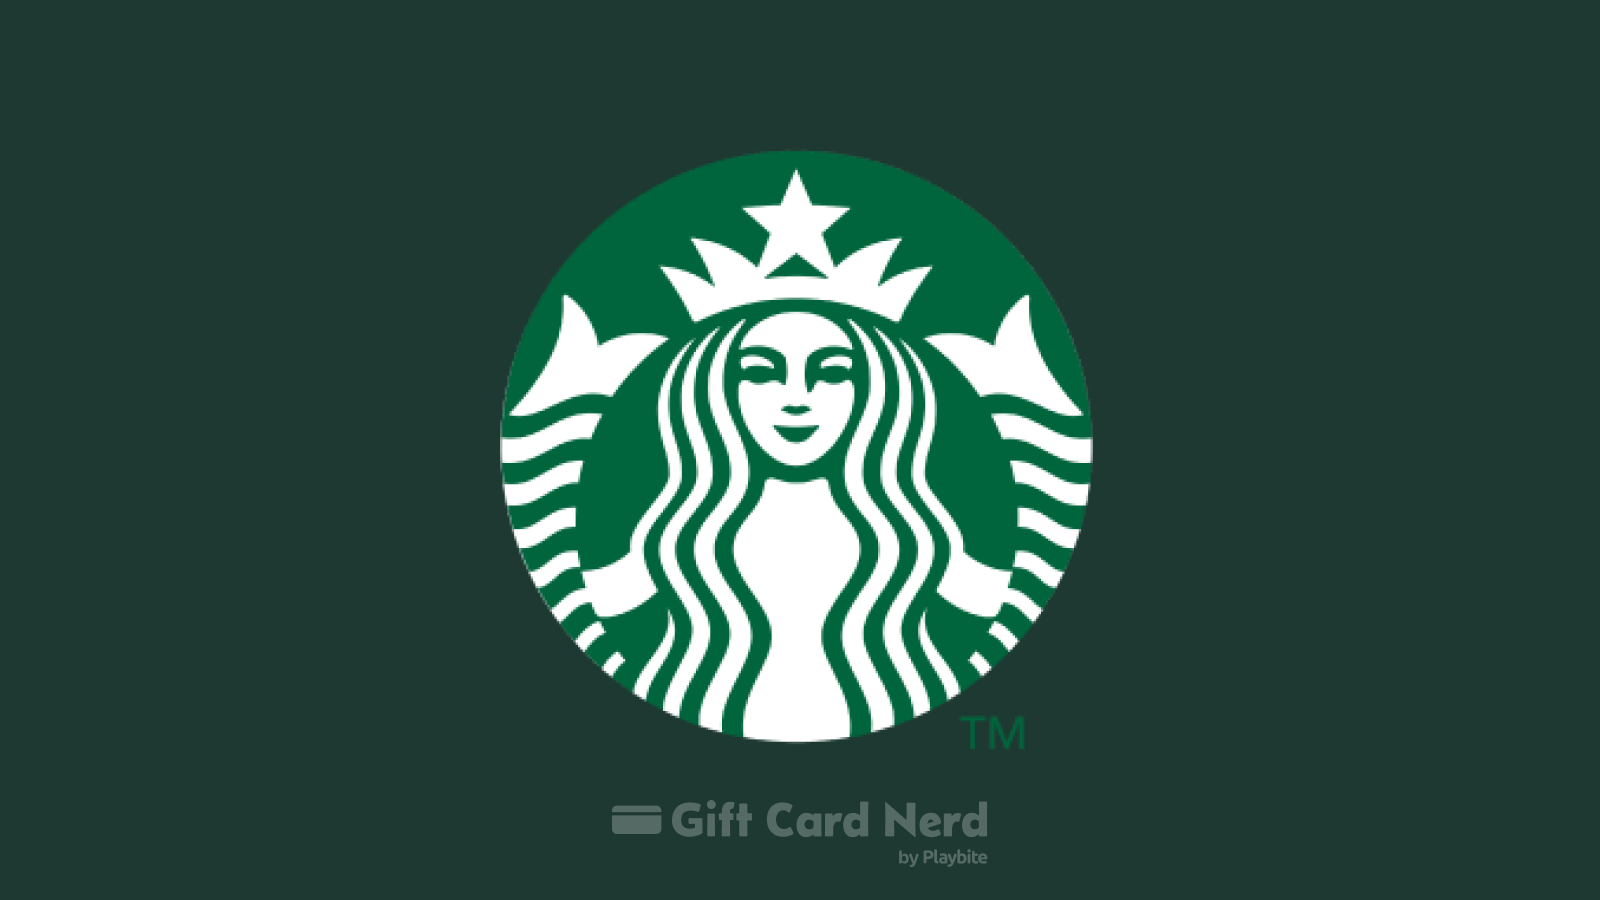 Can You Find Starbucks Gift Cards at Walmart?